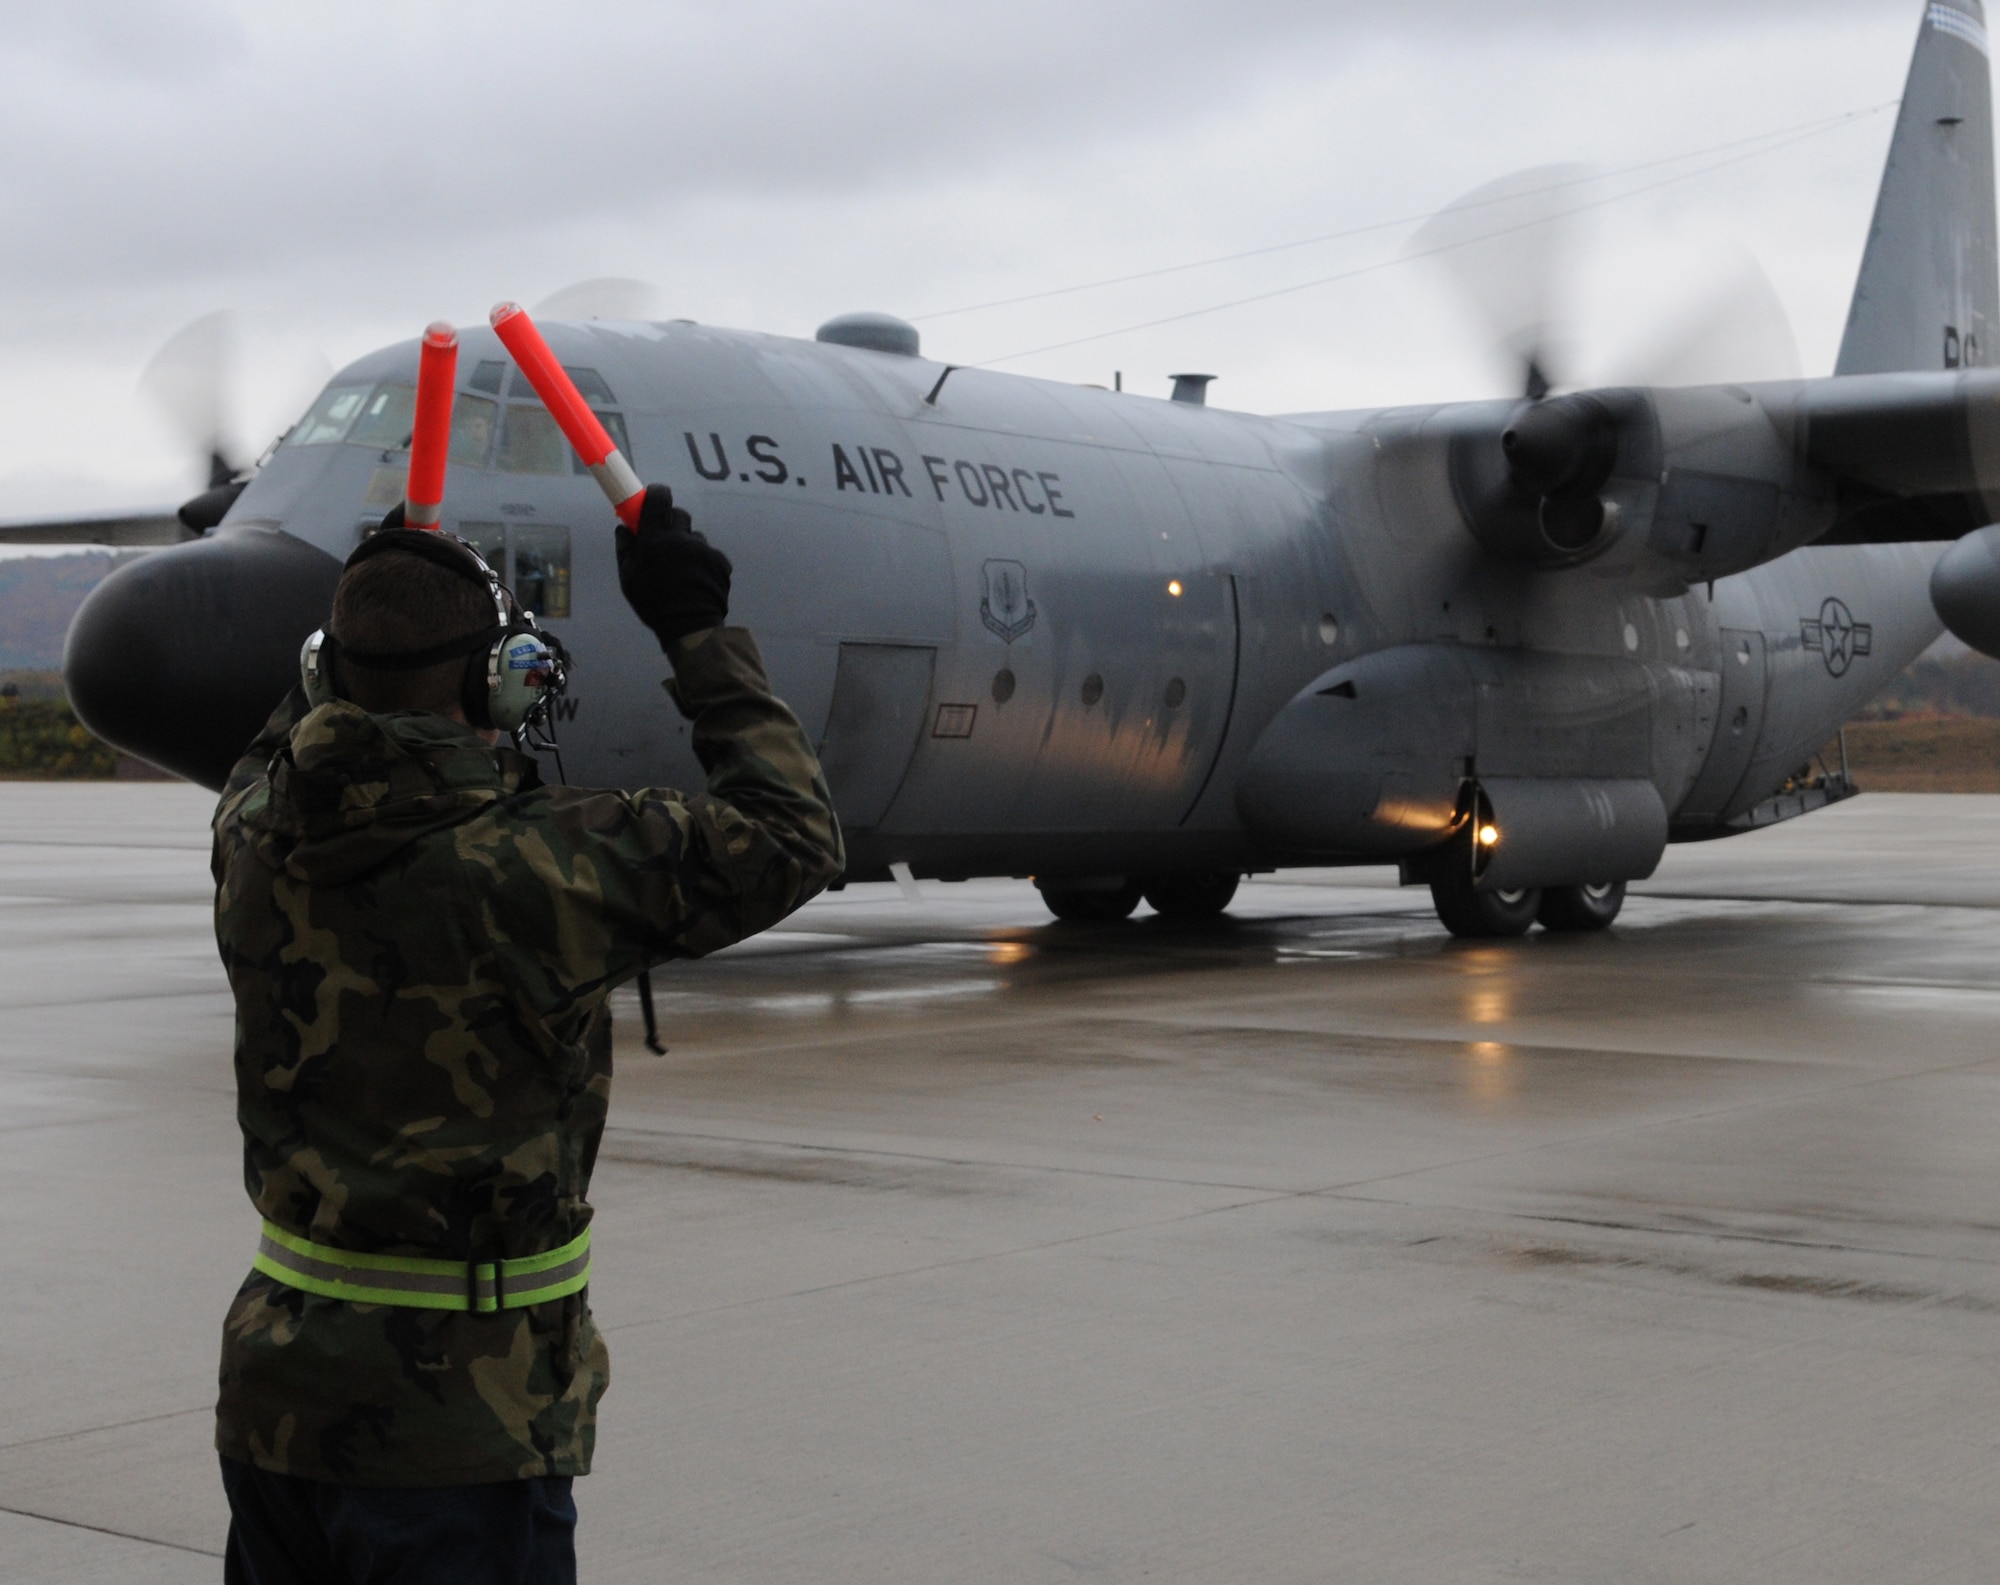 U.S. Air Force Senior Airman Jason Ricke, 86th Aircraft Maintenance Squadron crew chief, marshals Ramstein's last C-130E Hercules onto the flight line for departure, Ramstein Air Base, Germany, Nov. 2, 2009.  The C-130E Hercules has provided more than 40 years of airpower to U.S.  Air Forces Europe, and has been upgraded to the new C-130J Super Hercules as part of revitalizing the Air Force fleet. (U.S. Air Force photo by Airman 1st Class Caleb Pierce)